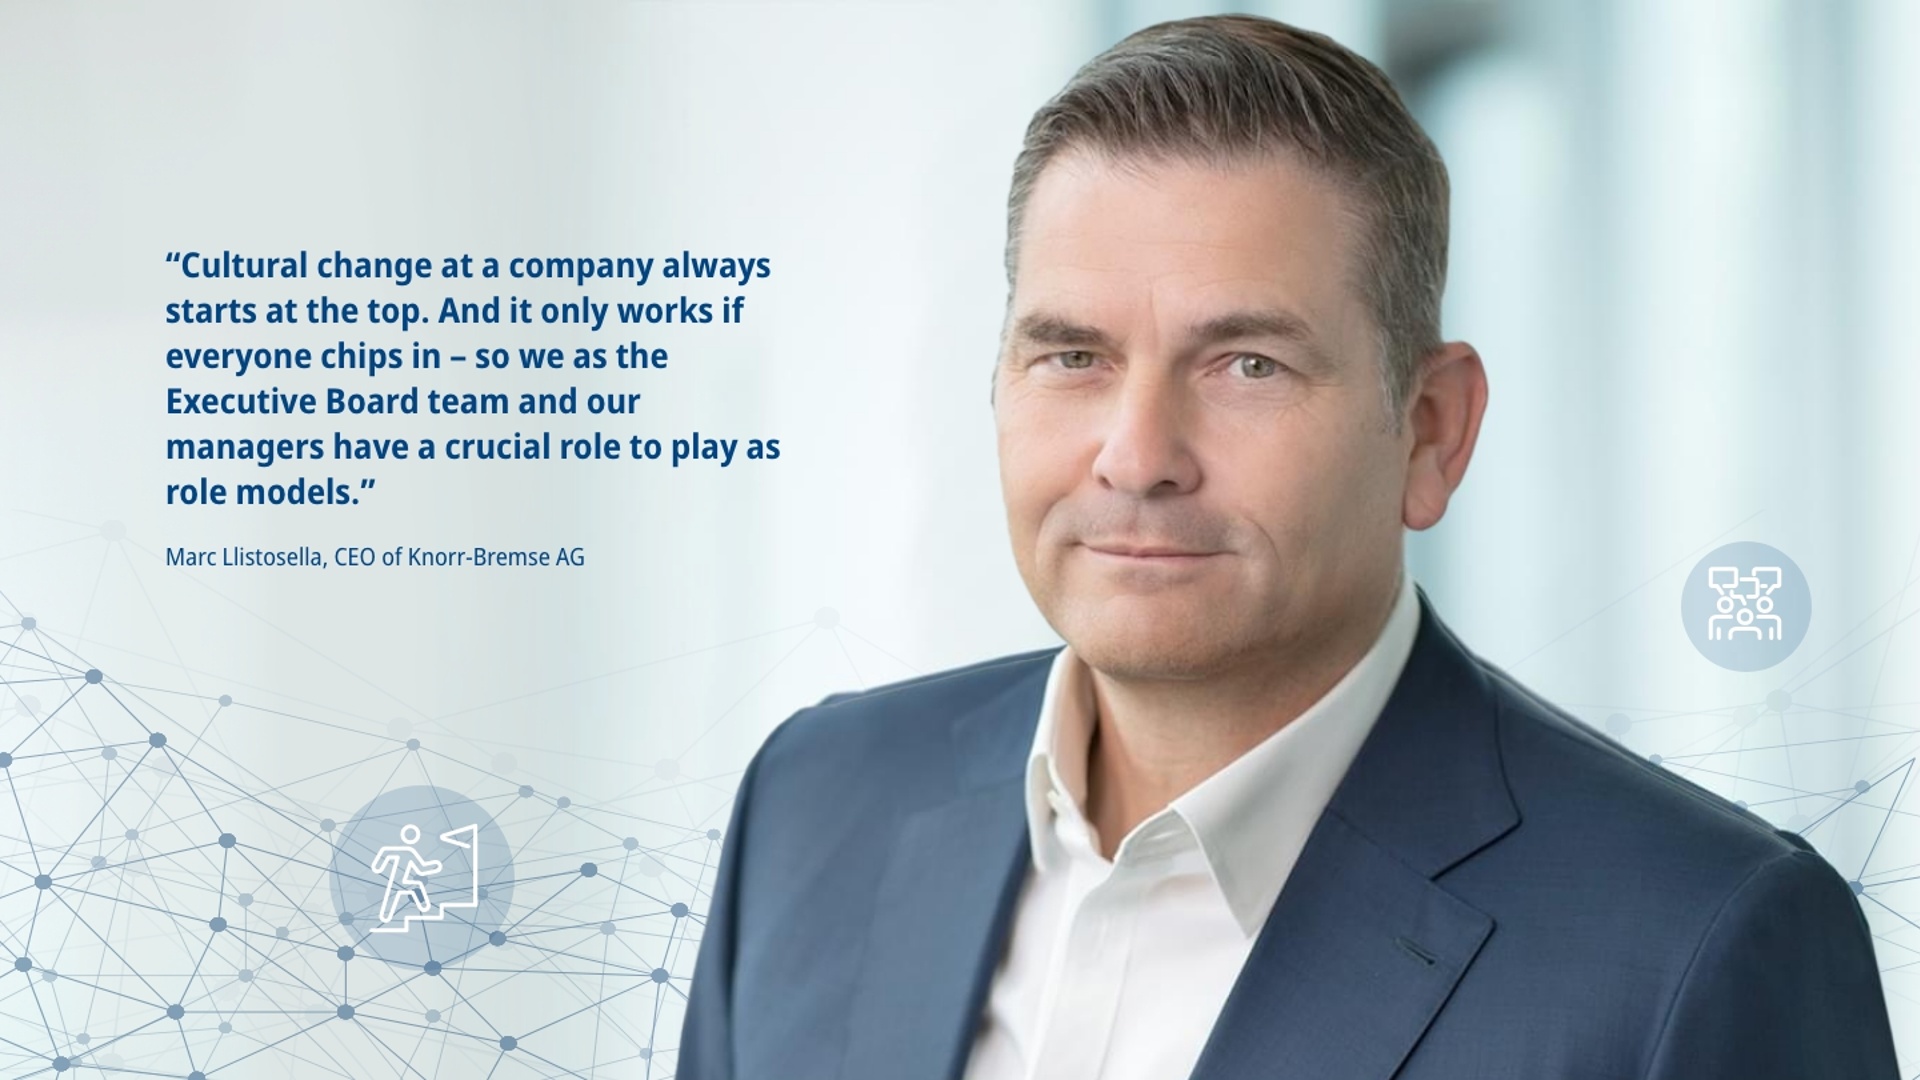 The picture shows a portrait of Marc Llistosella, CEO of Knorr-Bremse AG, and the following quote on the subject of cultural change: "Cultural change at a company always starts at the top. And it only works if everyone chips in - so we as the Executive Board team and our managers have a crucial role to play as role models."